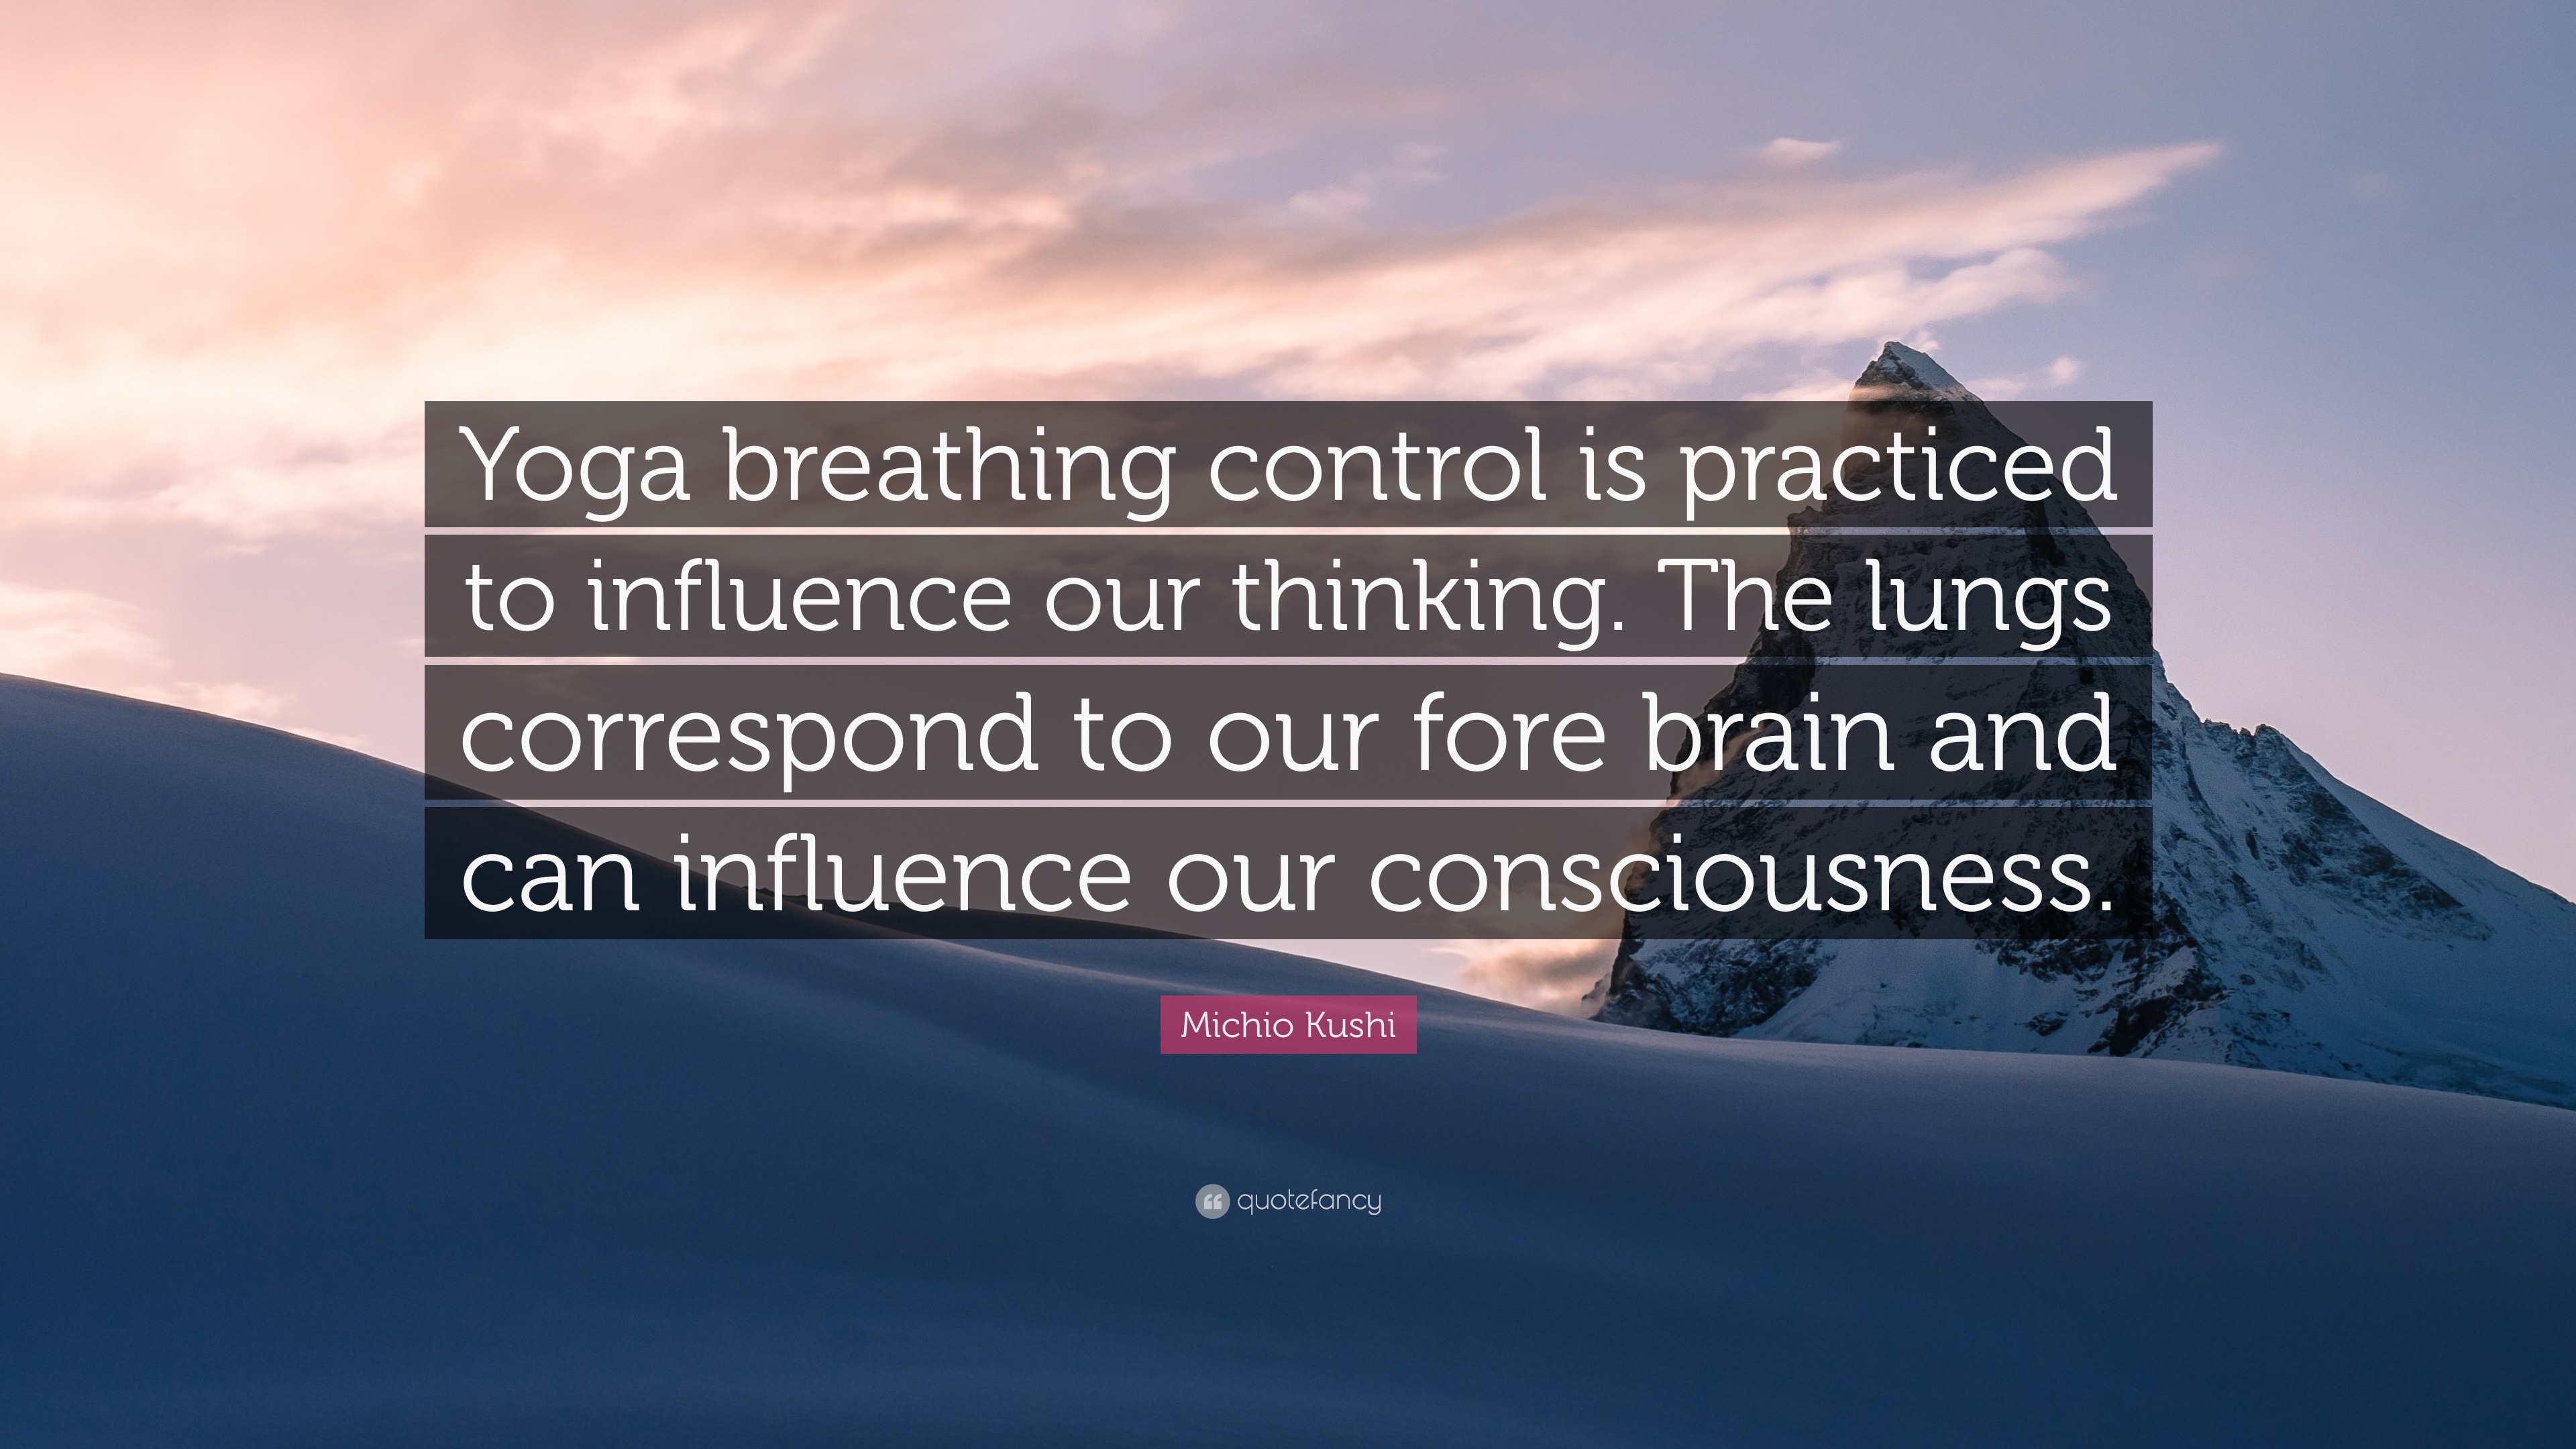 Horizon Yoga - In Yogic philosophy, when we are in a state of Nirvichara we  transcend the distractions of the mind and connect with our true essence.  It's here that one can